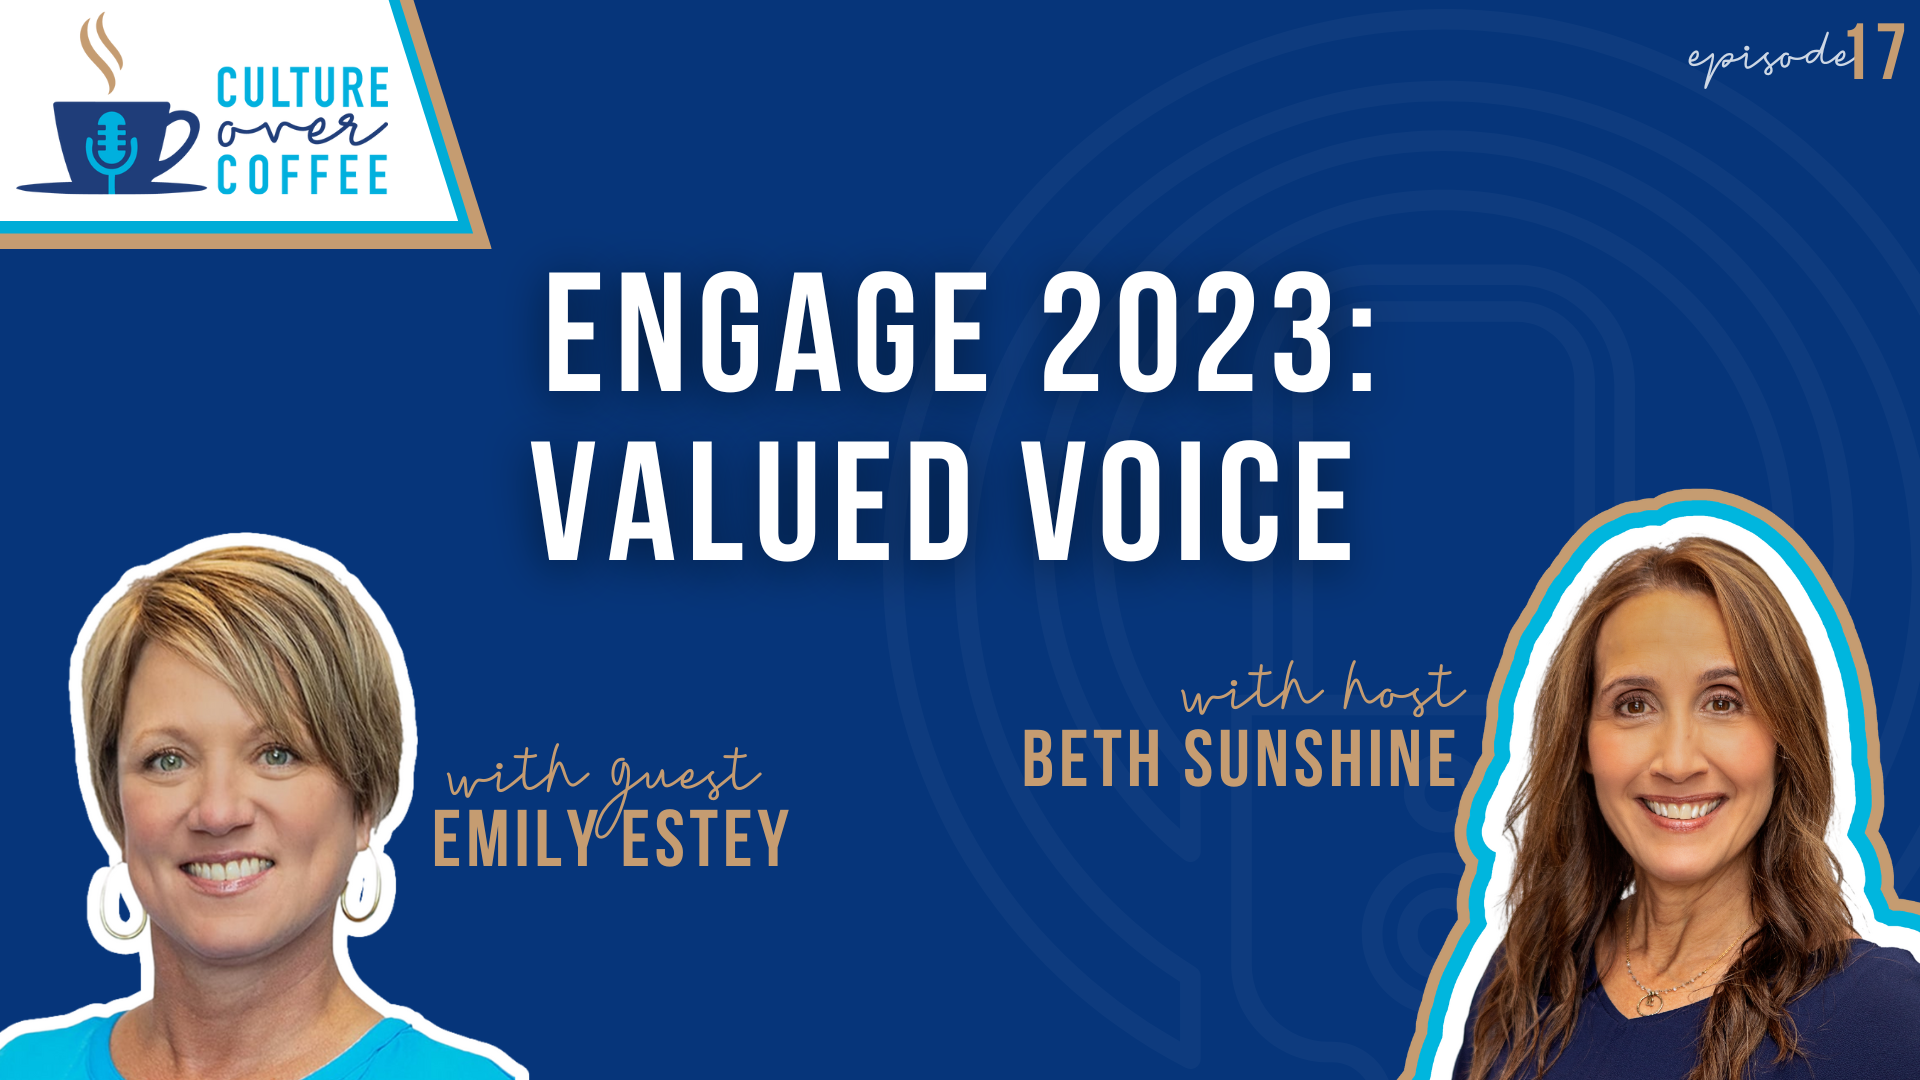 ENGAGE 2023: Valued Voice